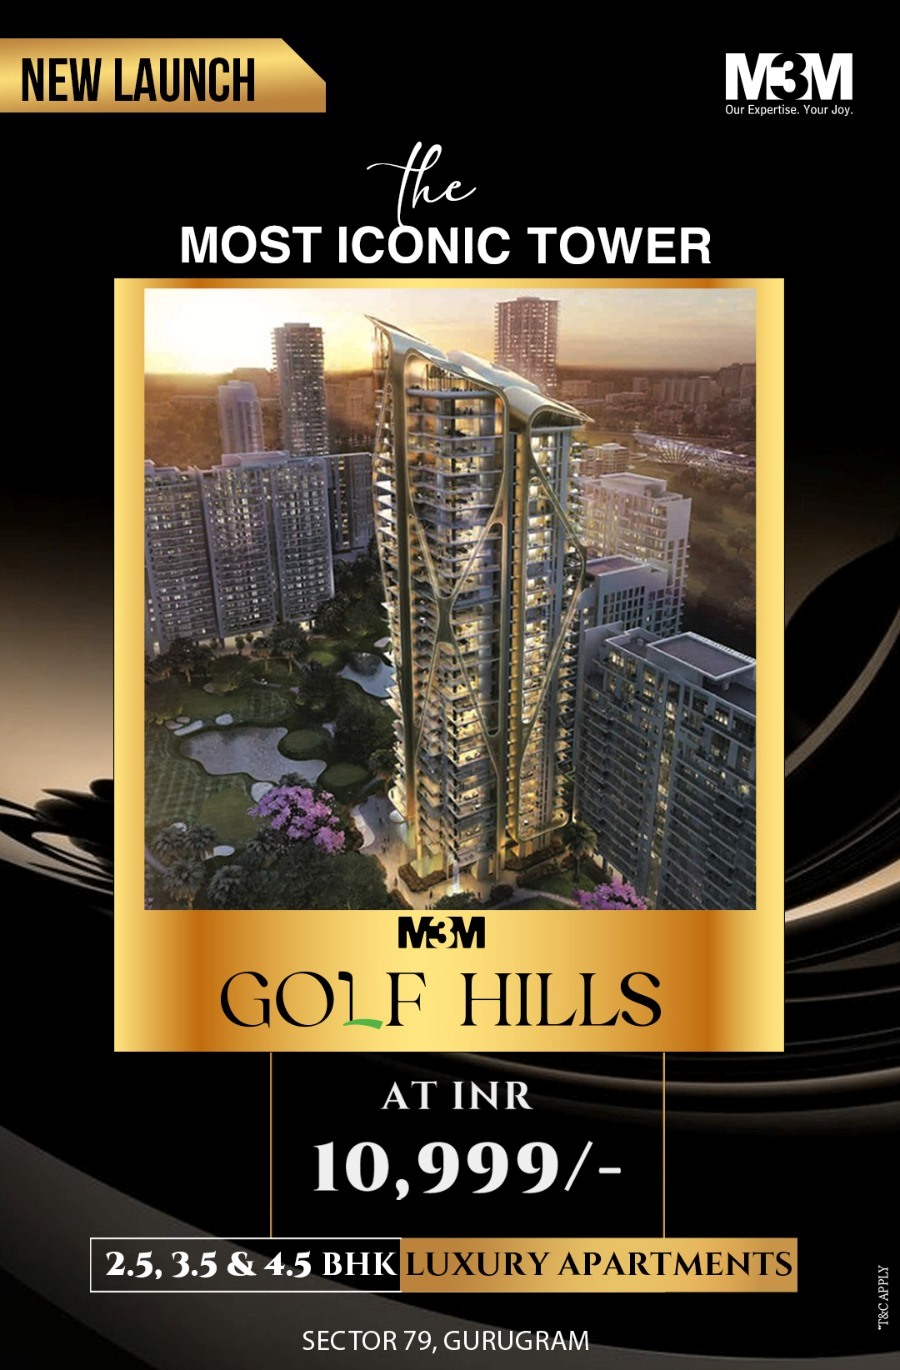 New launch the most iconic tower at M3M Golf Hills in Sector 79, Gurgaon Update